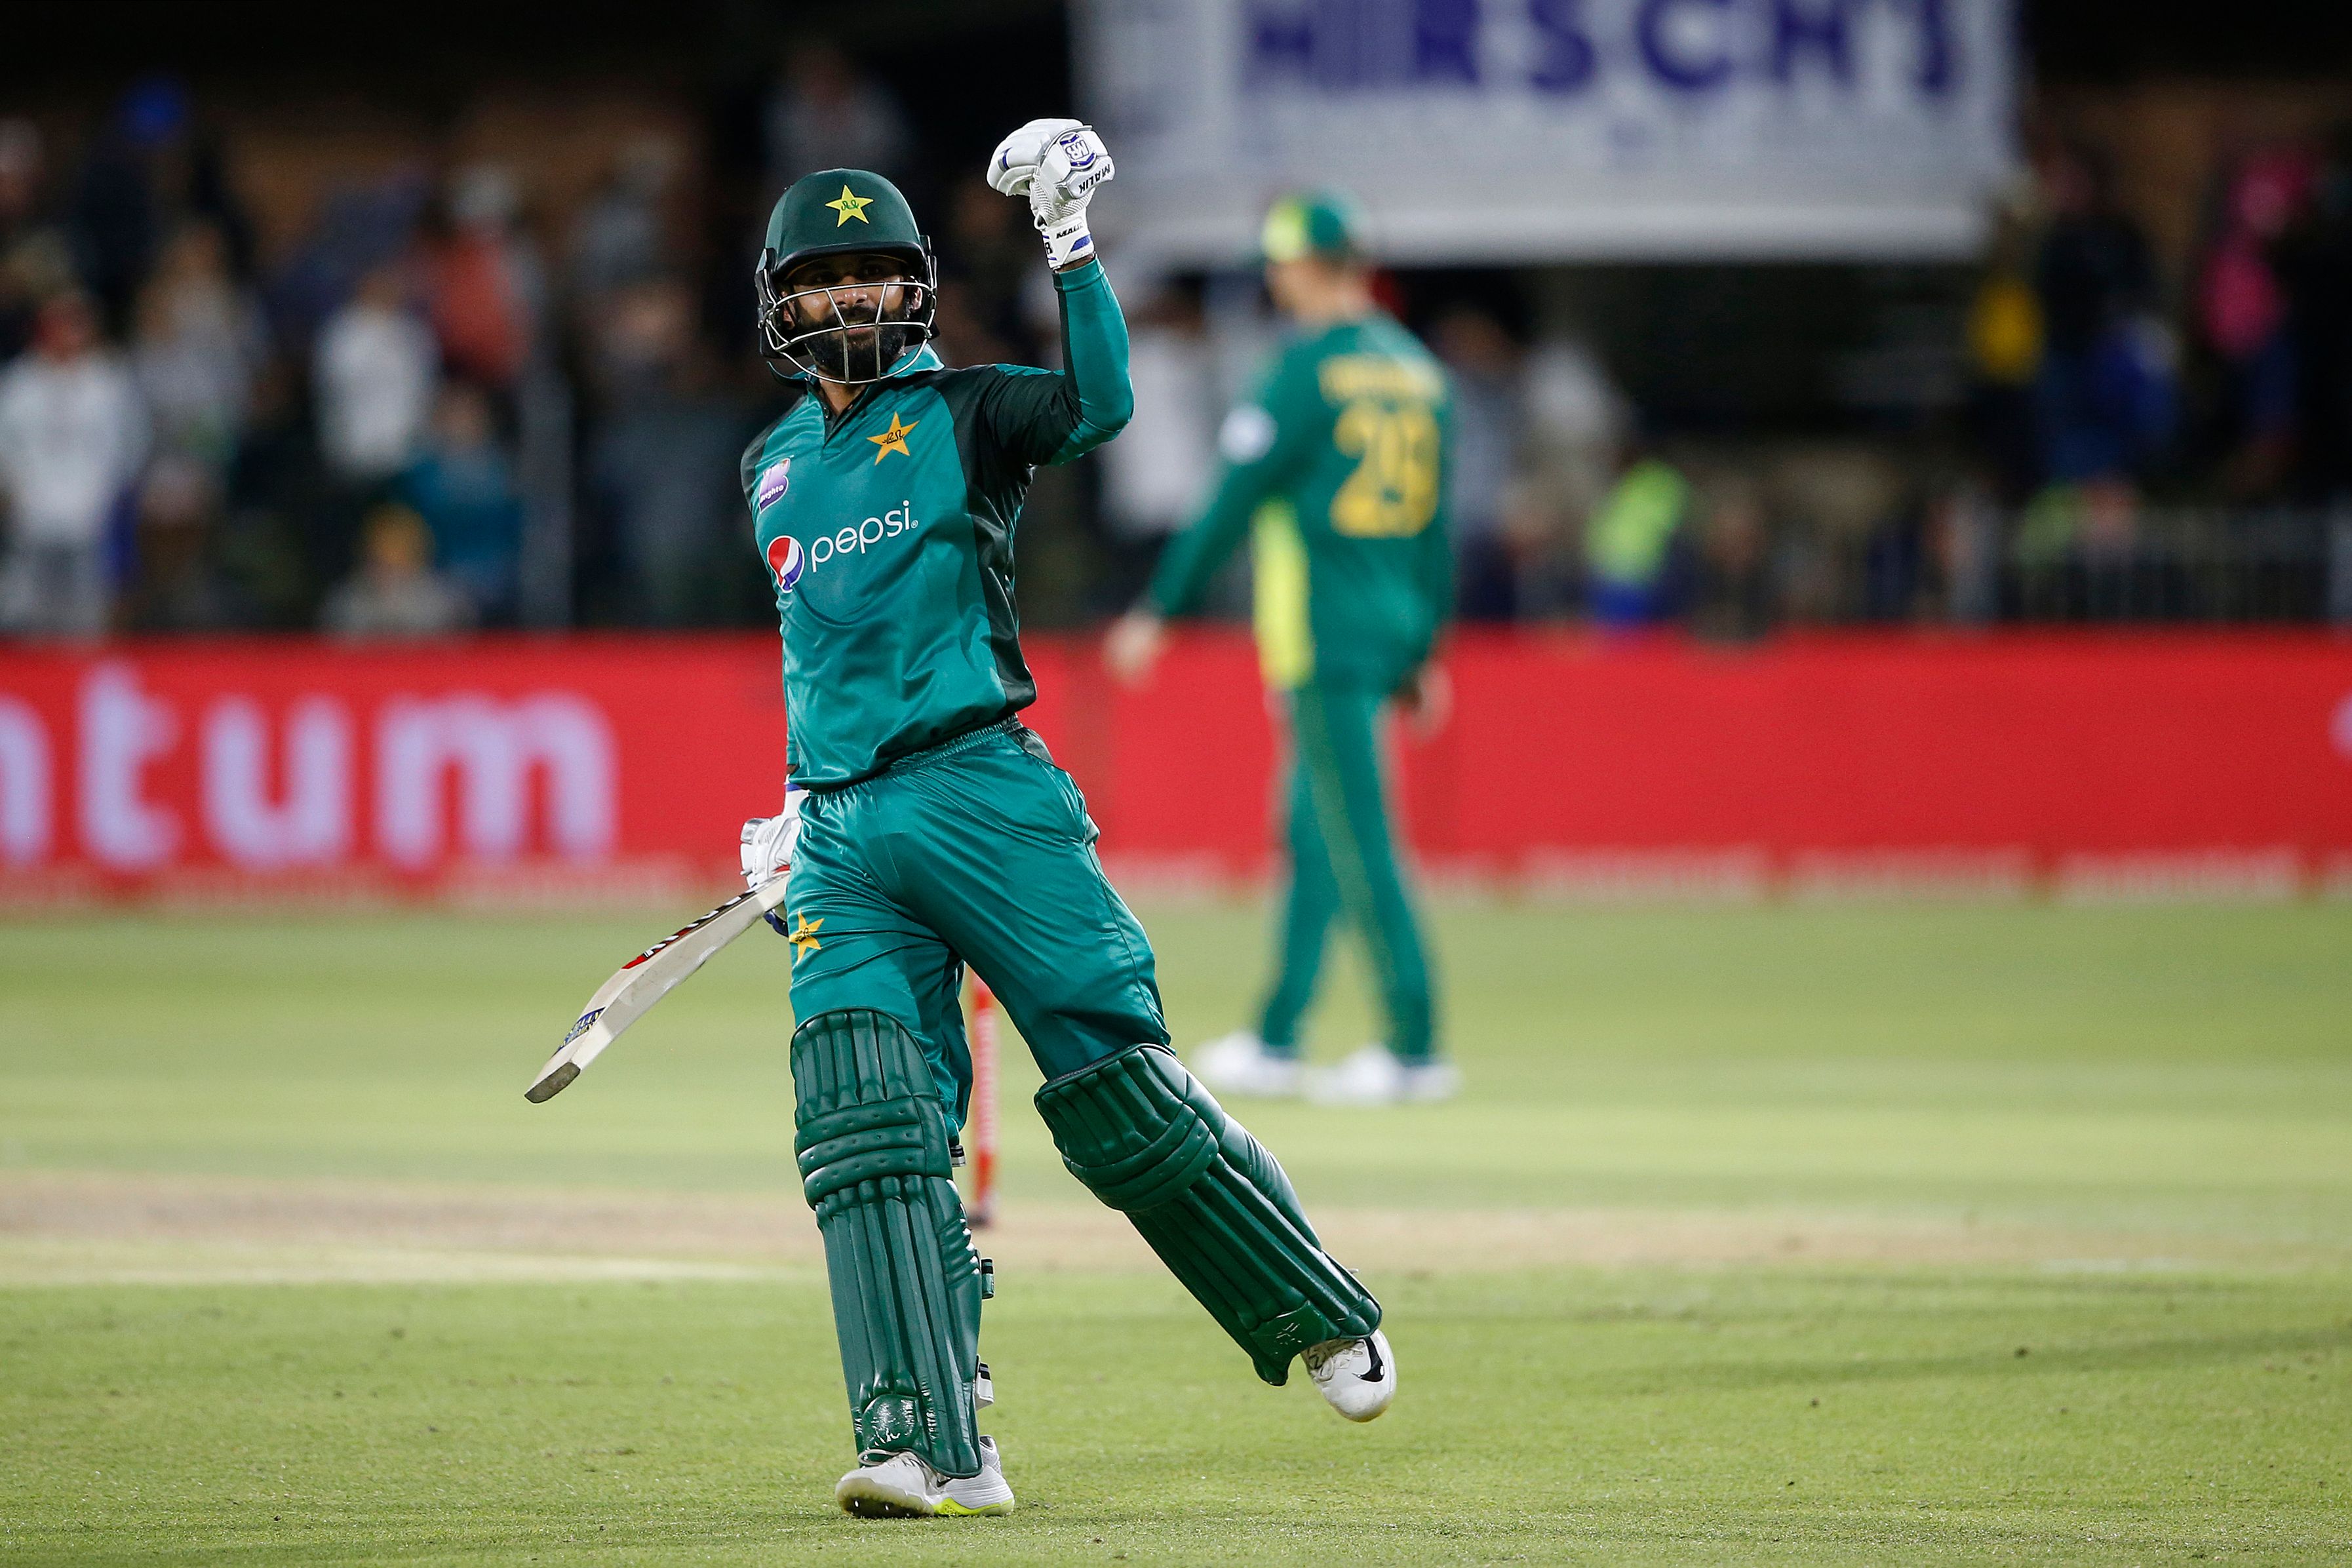 Imam, Hafeez steer Pakistan to victory over South Africa